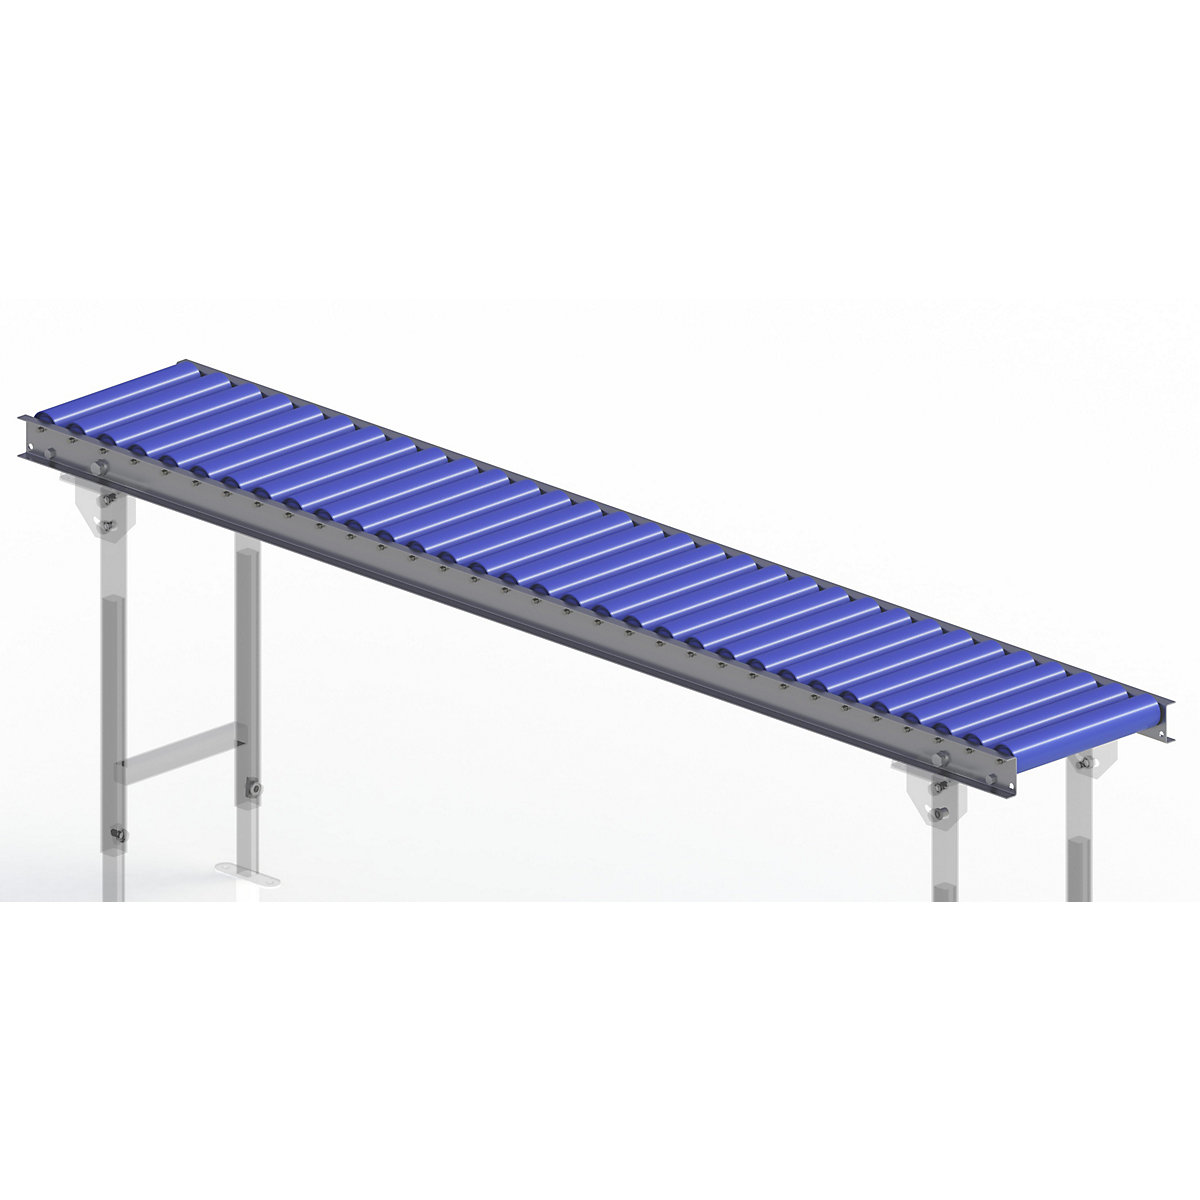 Gura – Light duty roller conveyor, steel frame with plastic rollers, track width 300 mm, axle spacing 62.5 mm, length 2.0 m